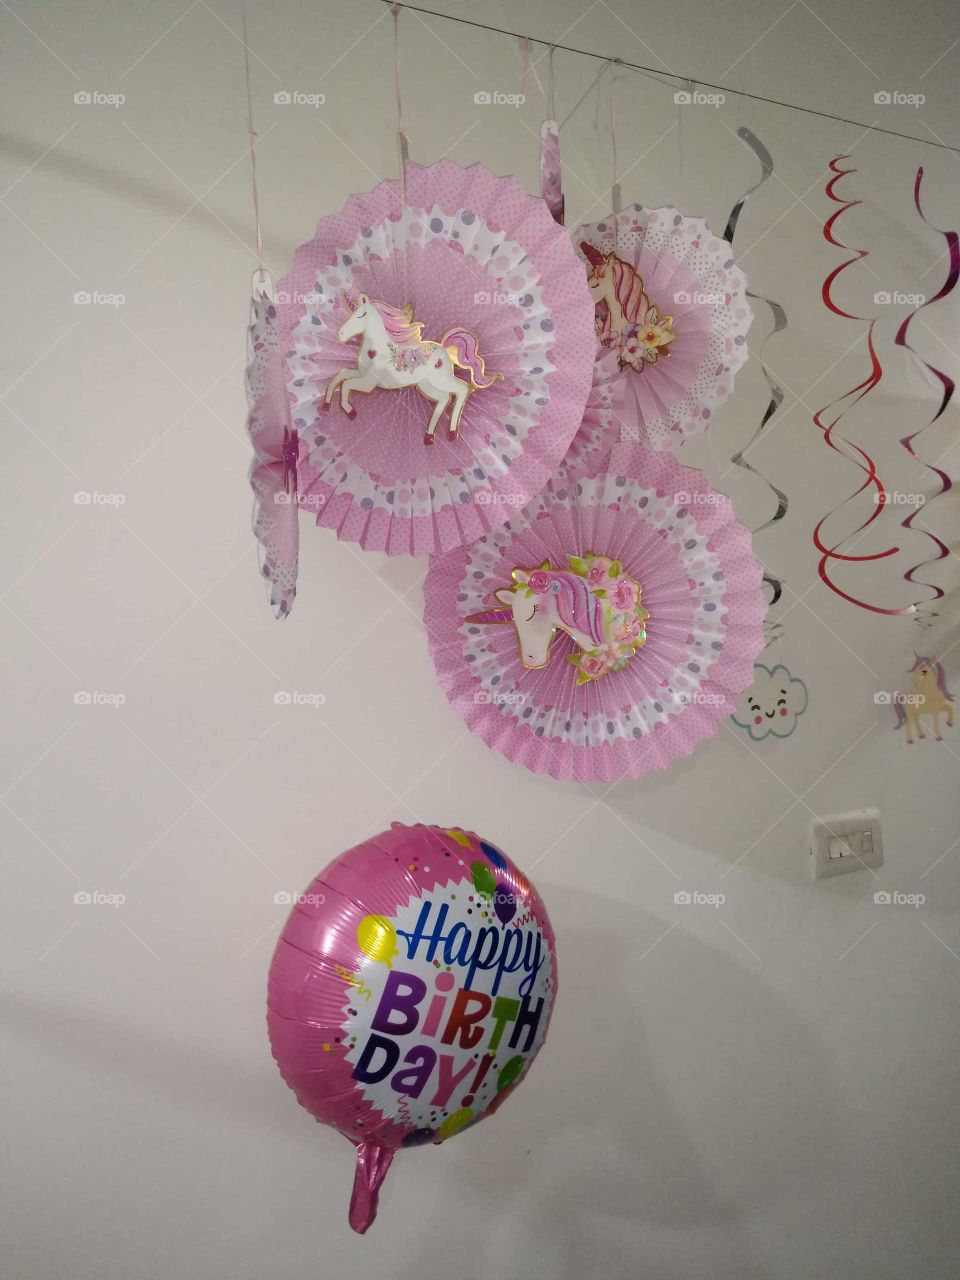 decoration in a birthday party